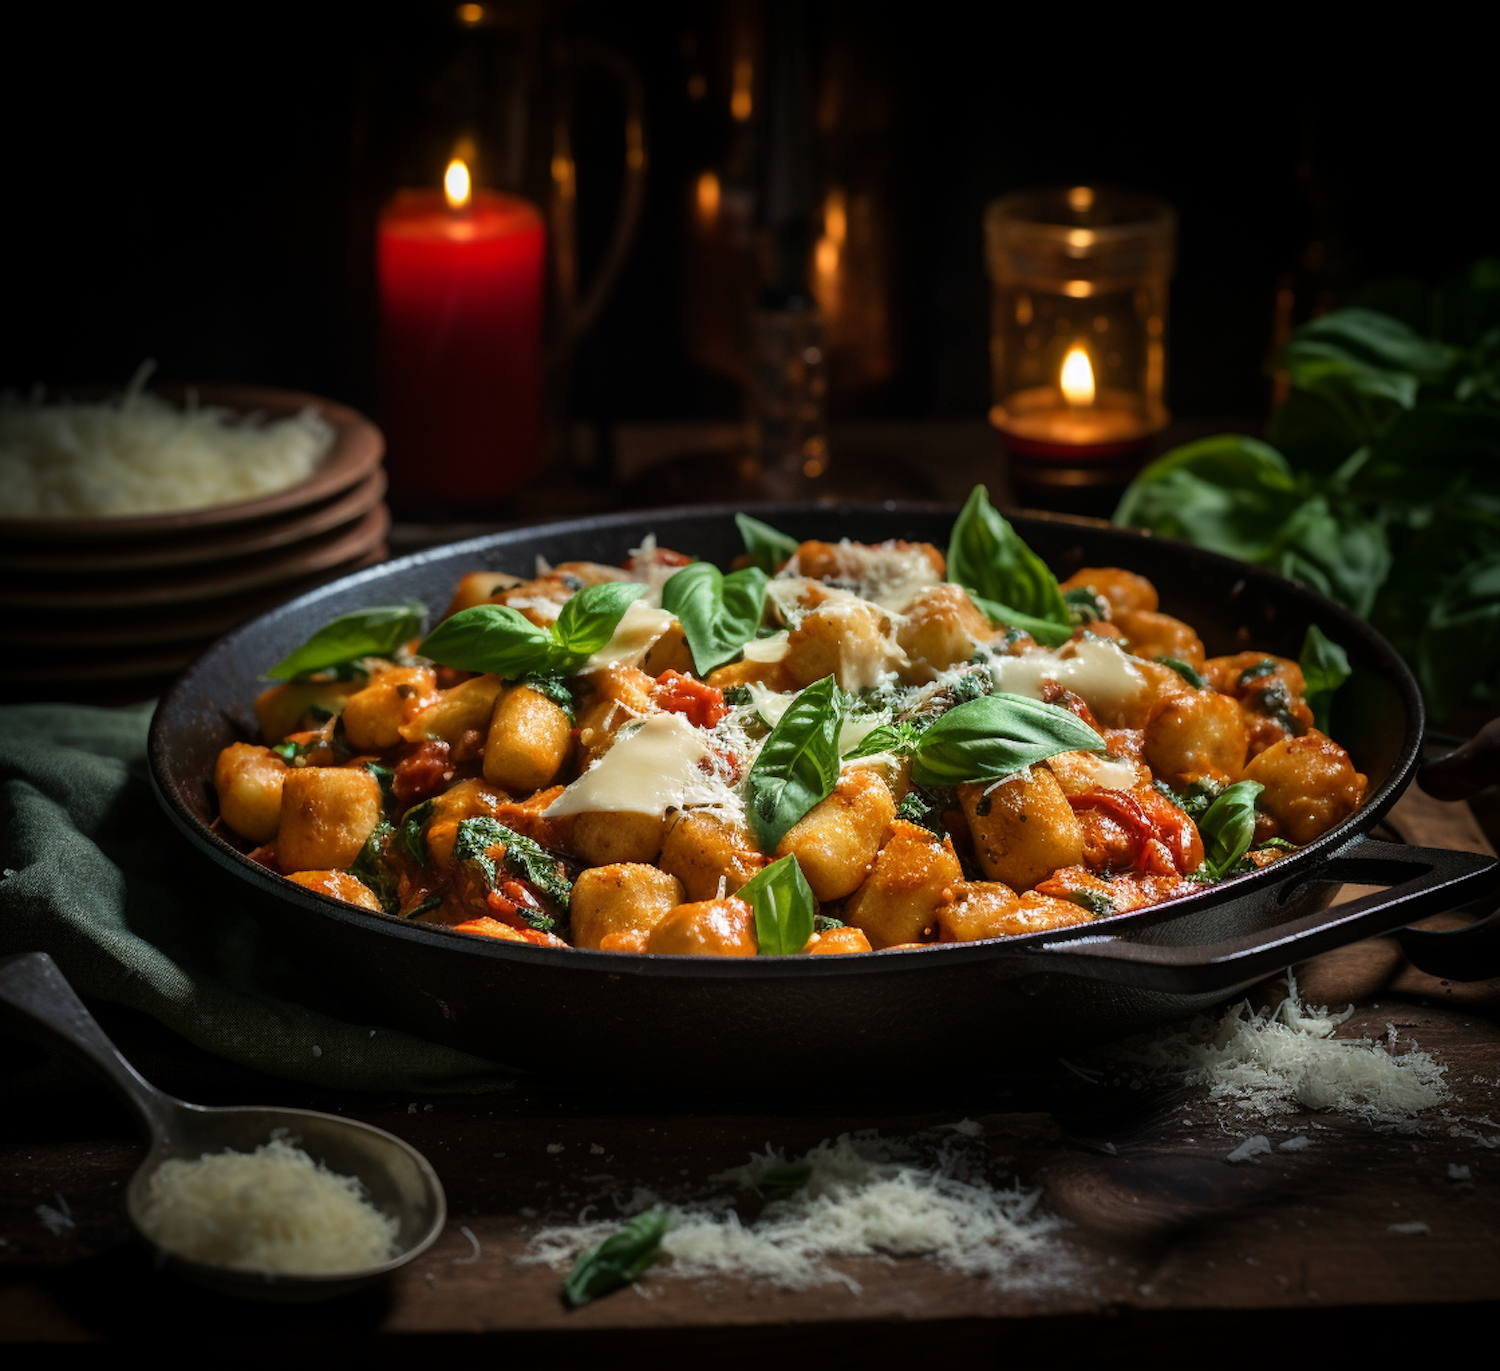 Rustic Skillet Toasted Gnocchi with Tomato Sauce and Melted Cheese